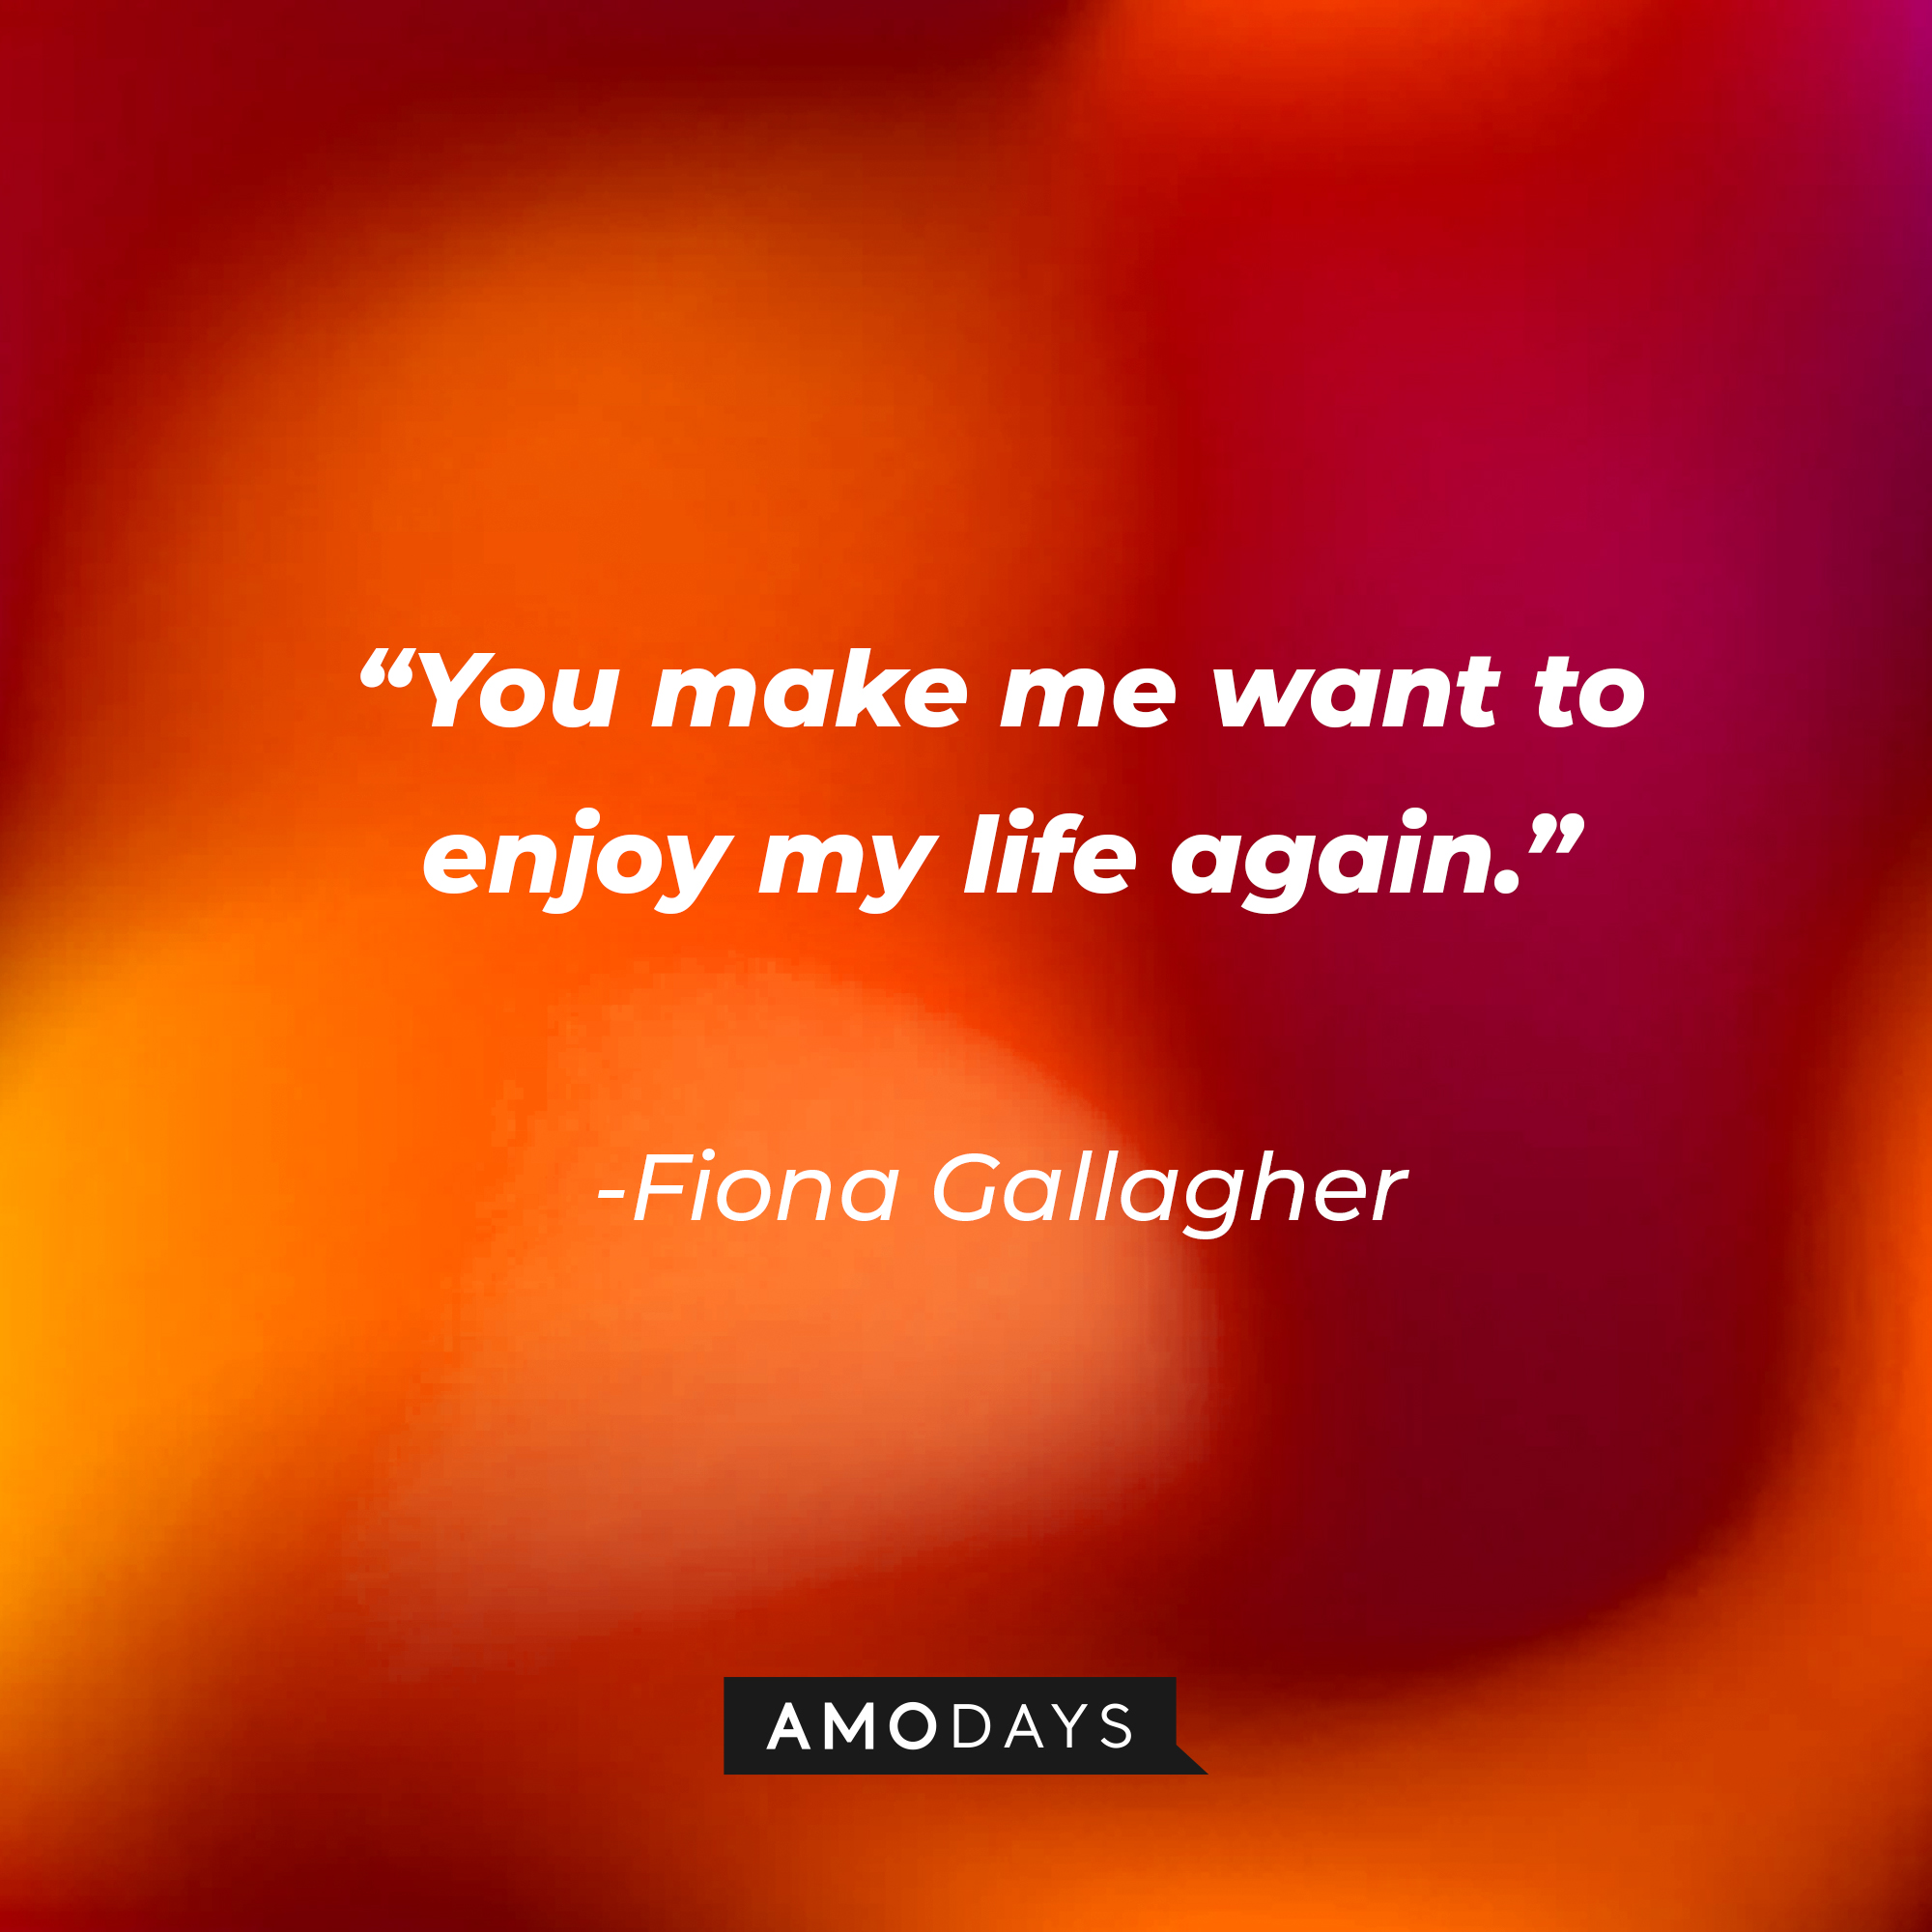 Fiona Gallagher’s quote: “You make me want to enjoy my life again.” | Source: AmoDays